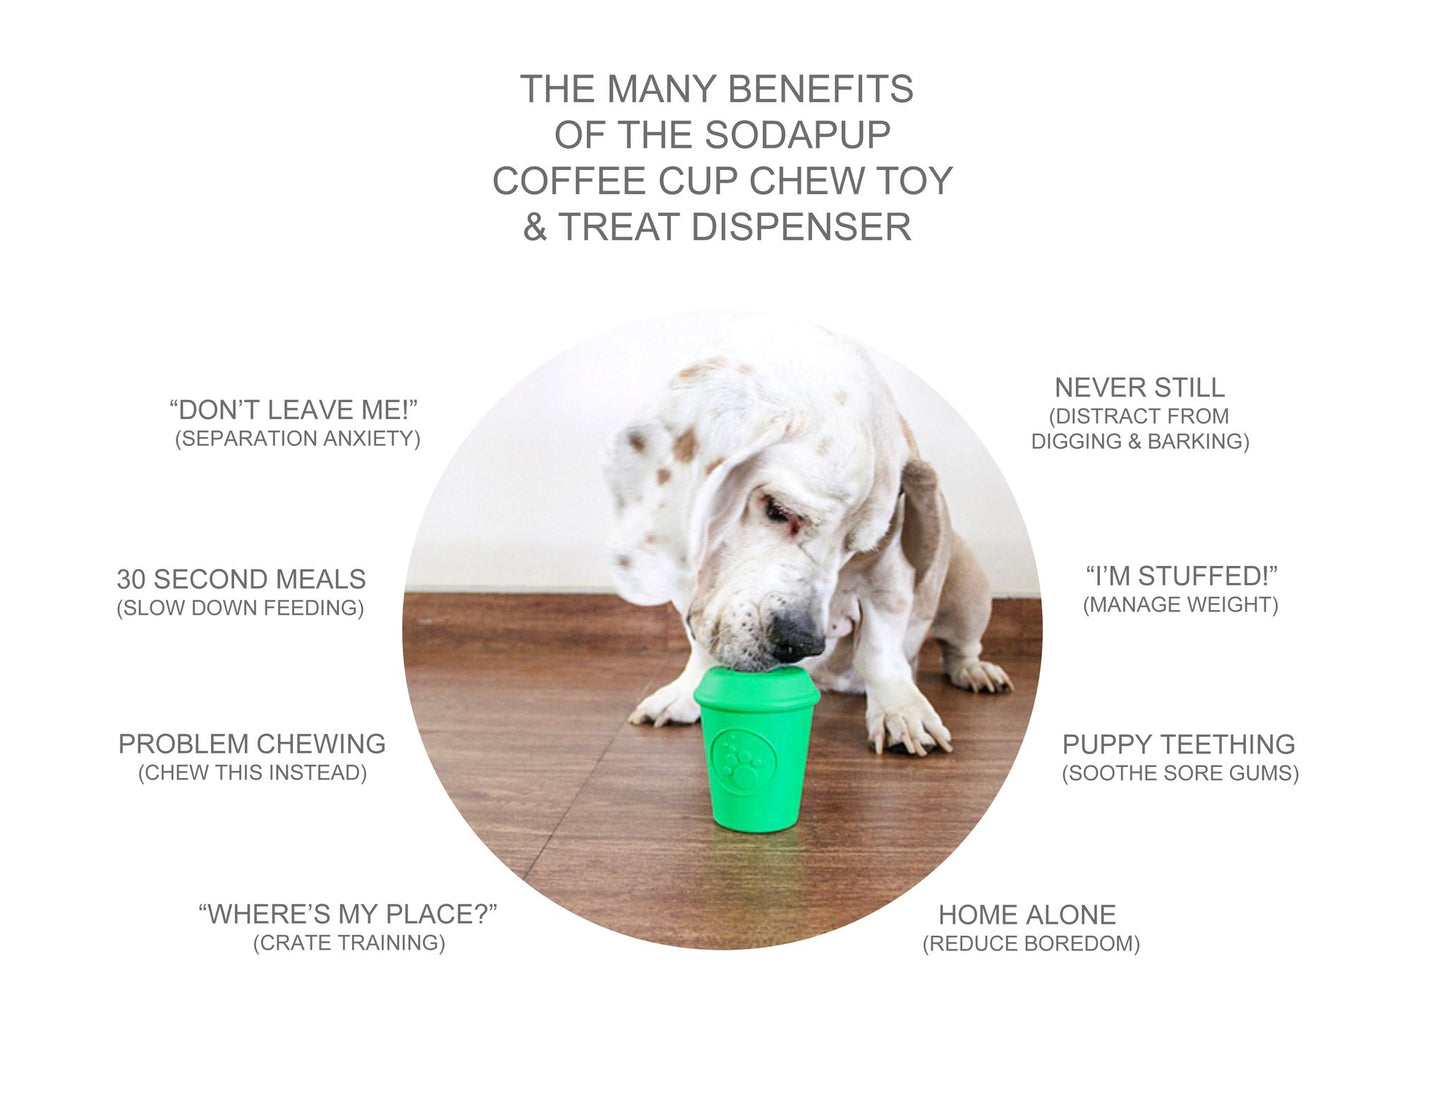 Explore the incredible benefits of the CLEARANCE: Your Whole Dog Soda Pup COFFEE CUP TOY & TREAT DISPENSER (M & L), featuring a durable chew toy and treat dispenser.